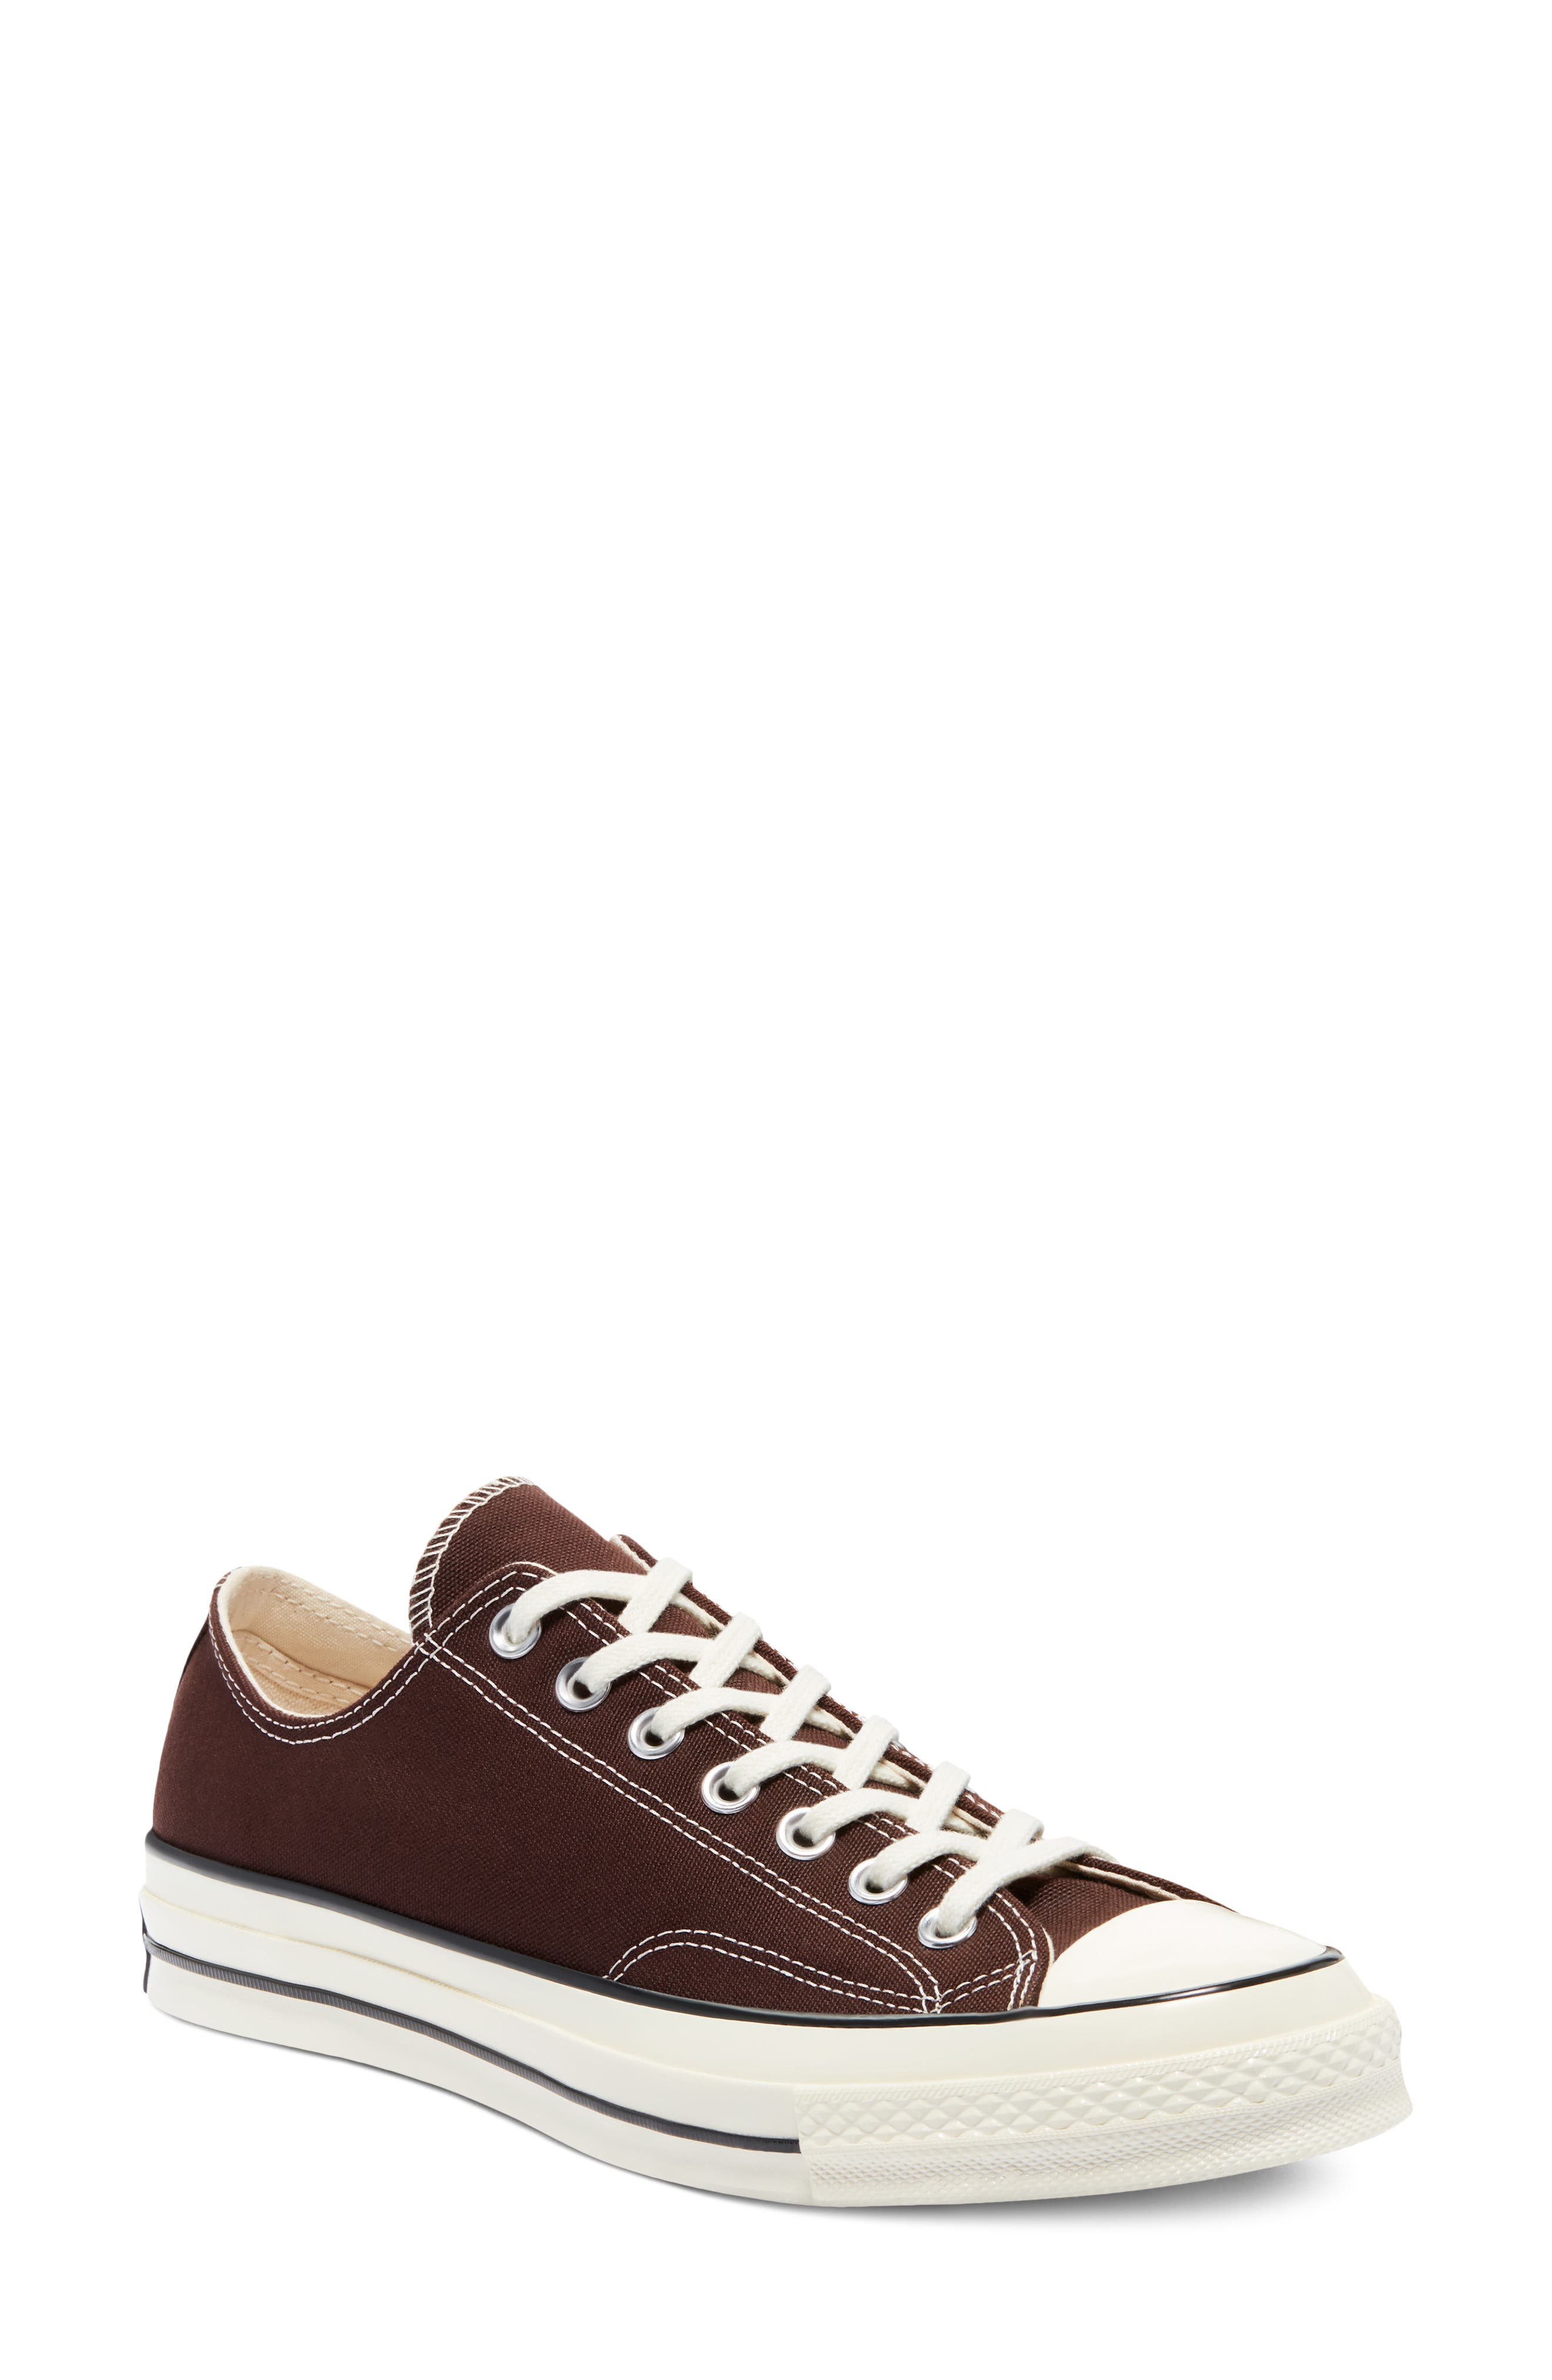 brown converse low tops